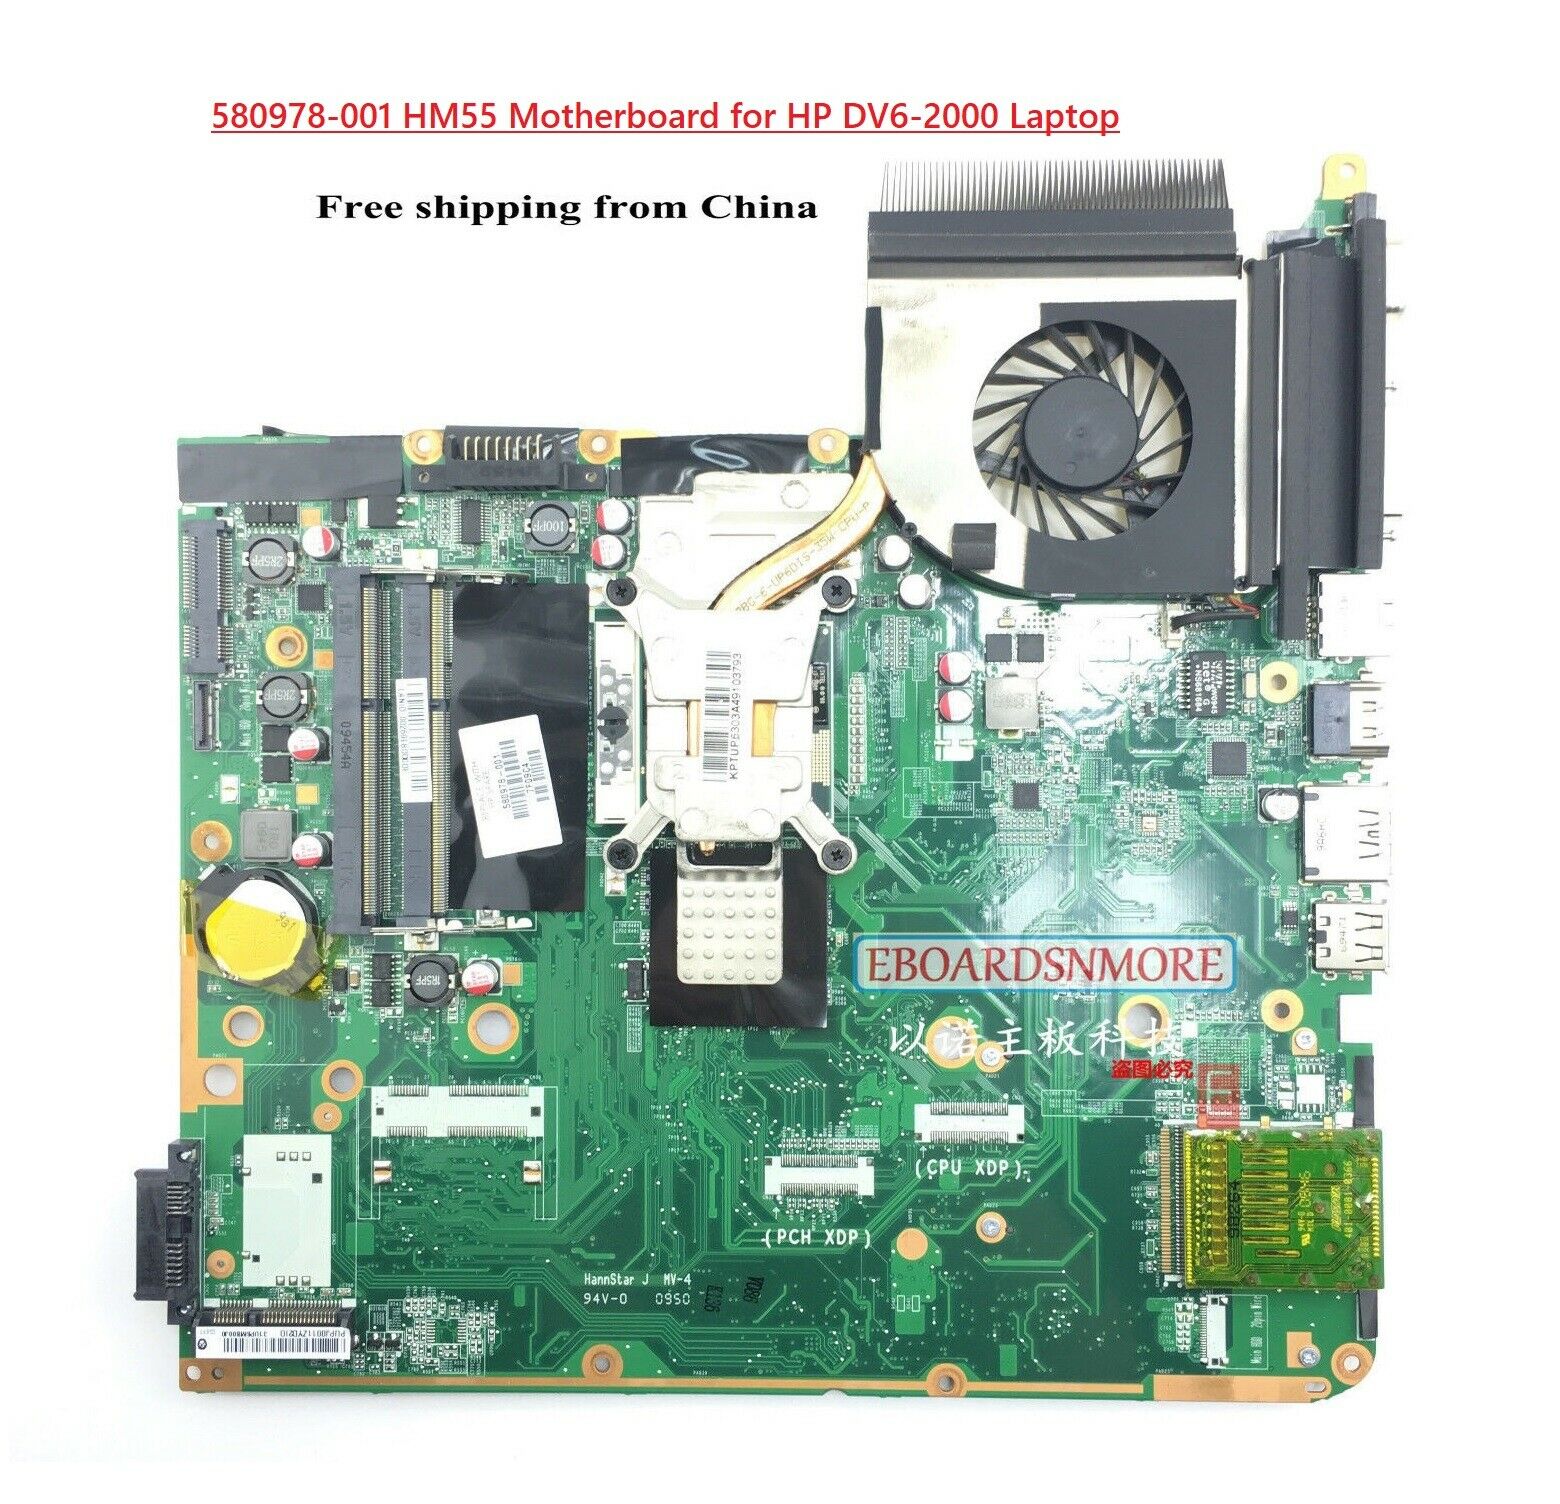 580978-001 Intel Motherboard Set for HP DV6-2000 Laptop, REPLACES 571188-001 MPN: 580978-001 Model: See t